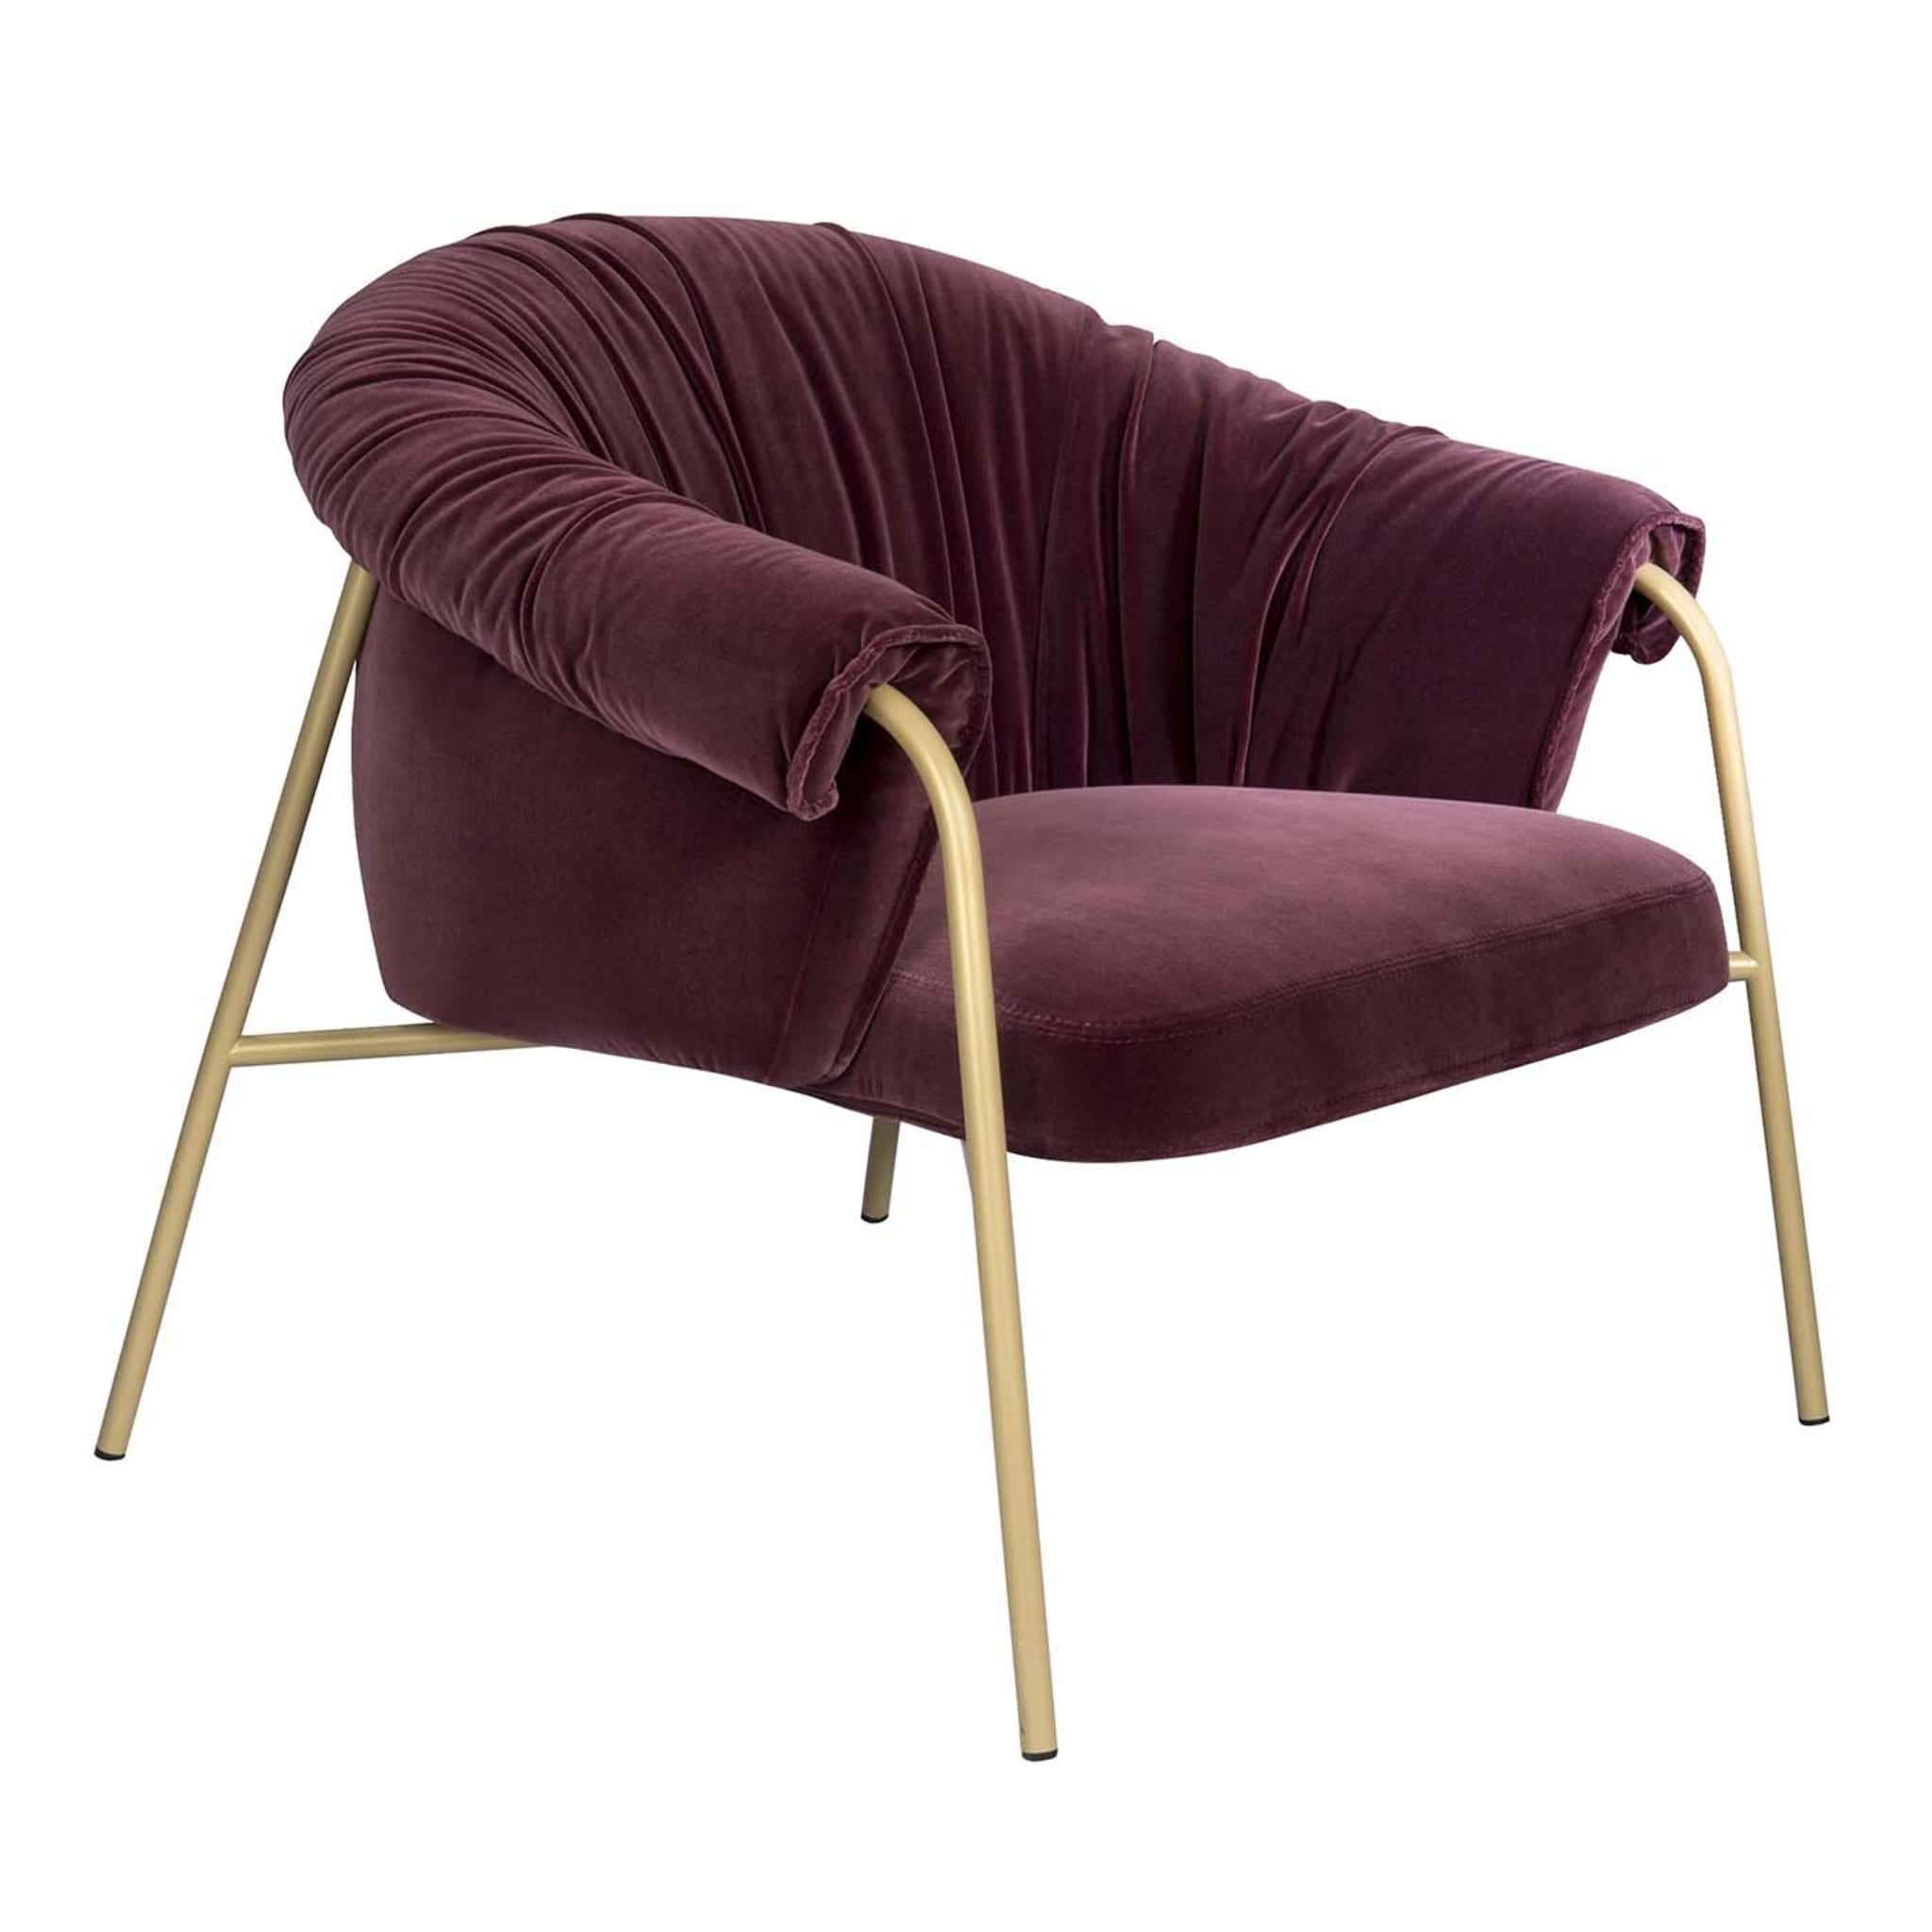 Scala Burgundy Lounge Chair by Marco Piva - Main view